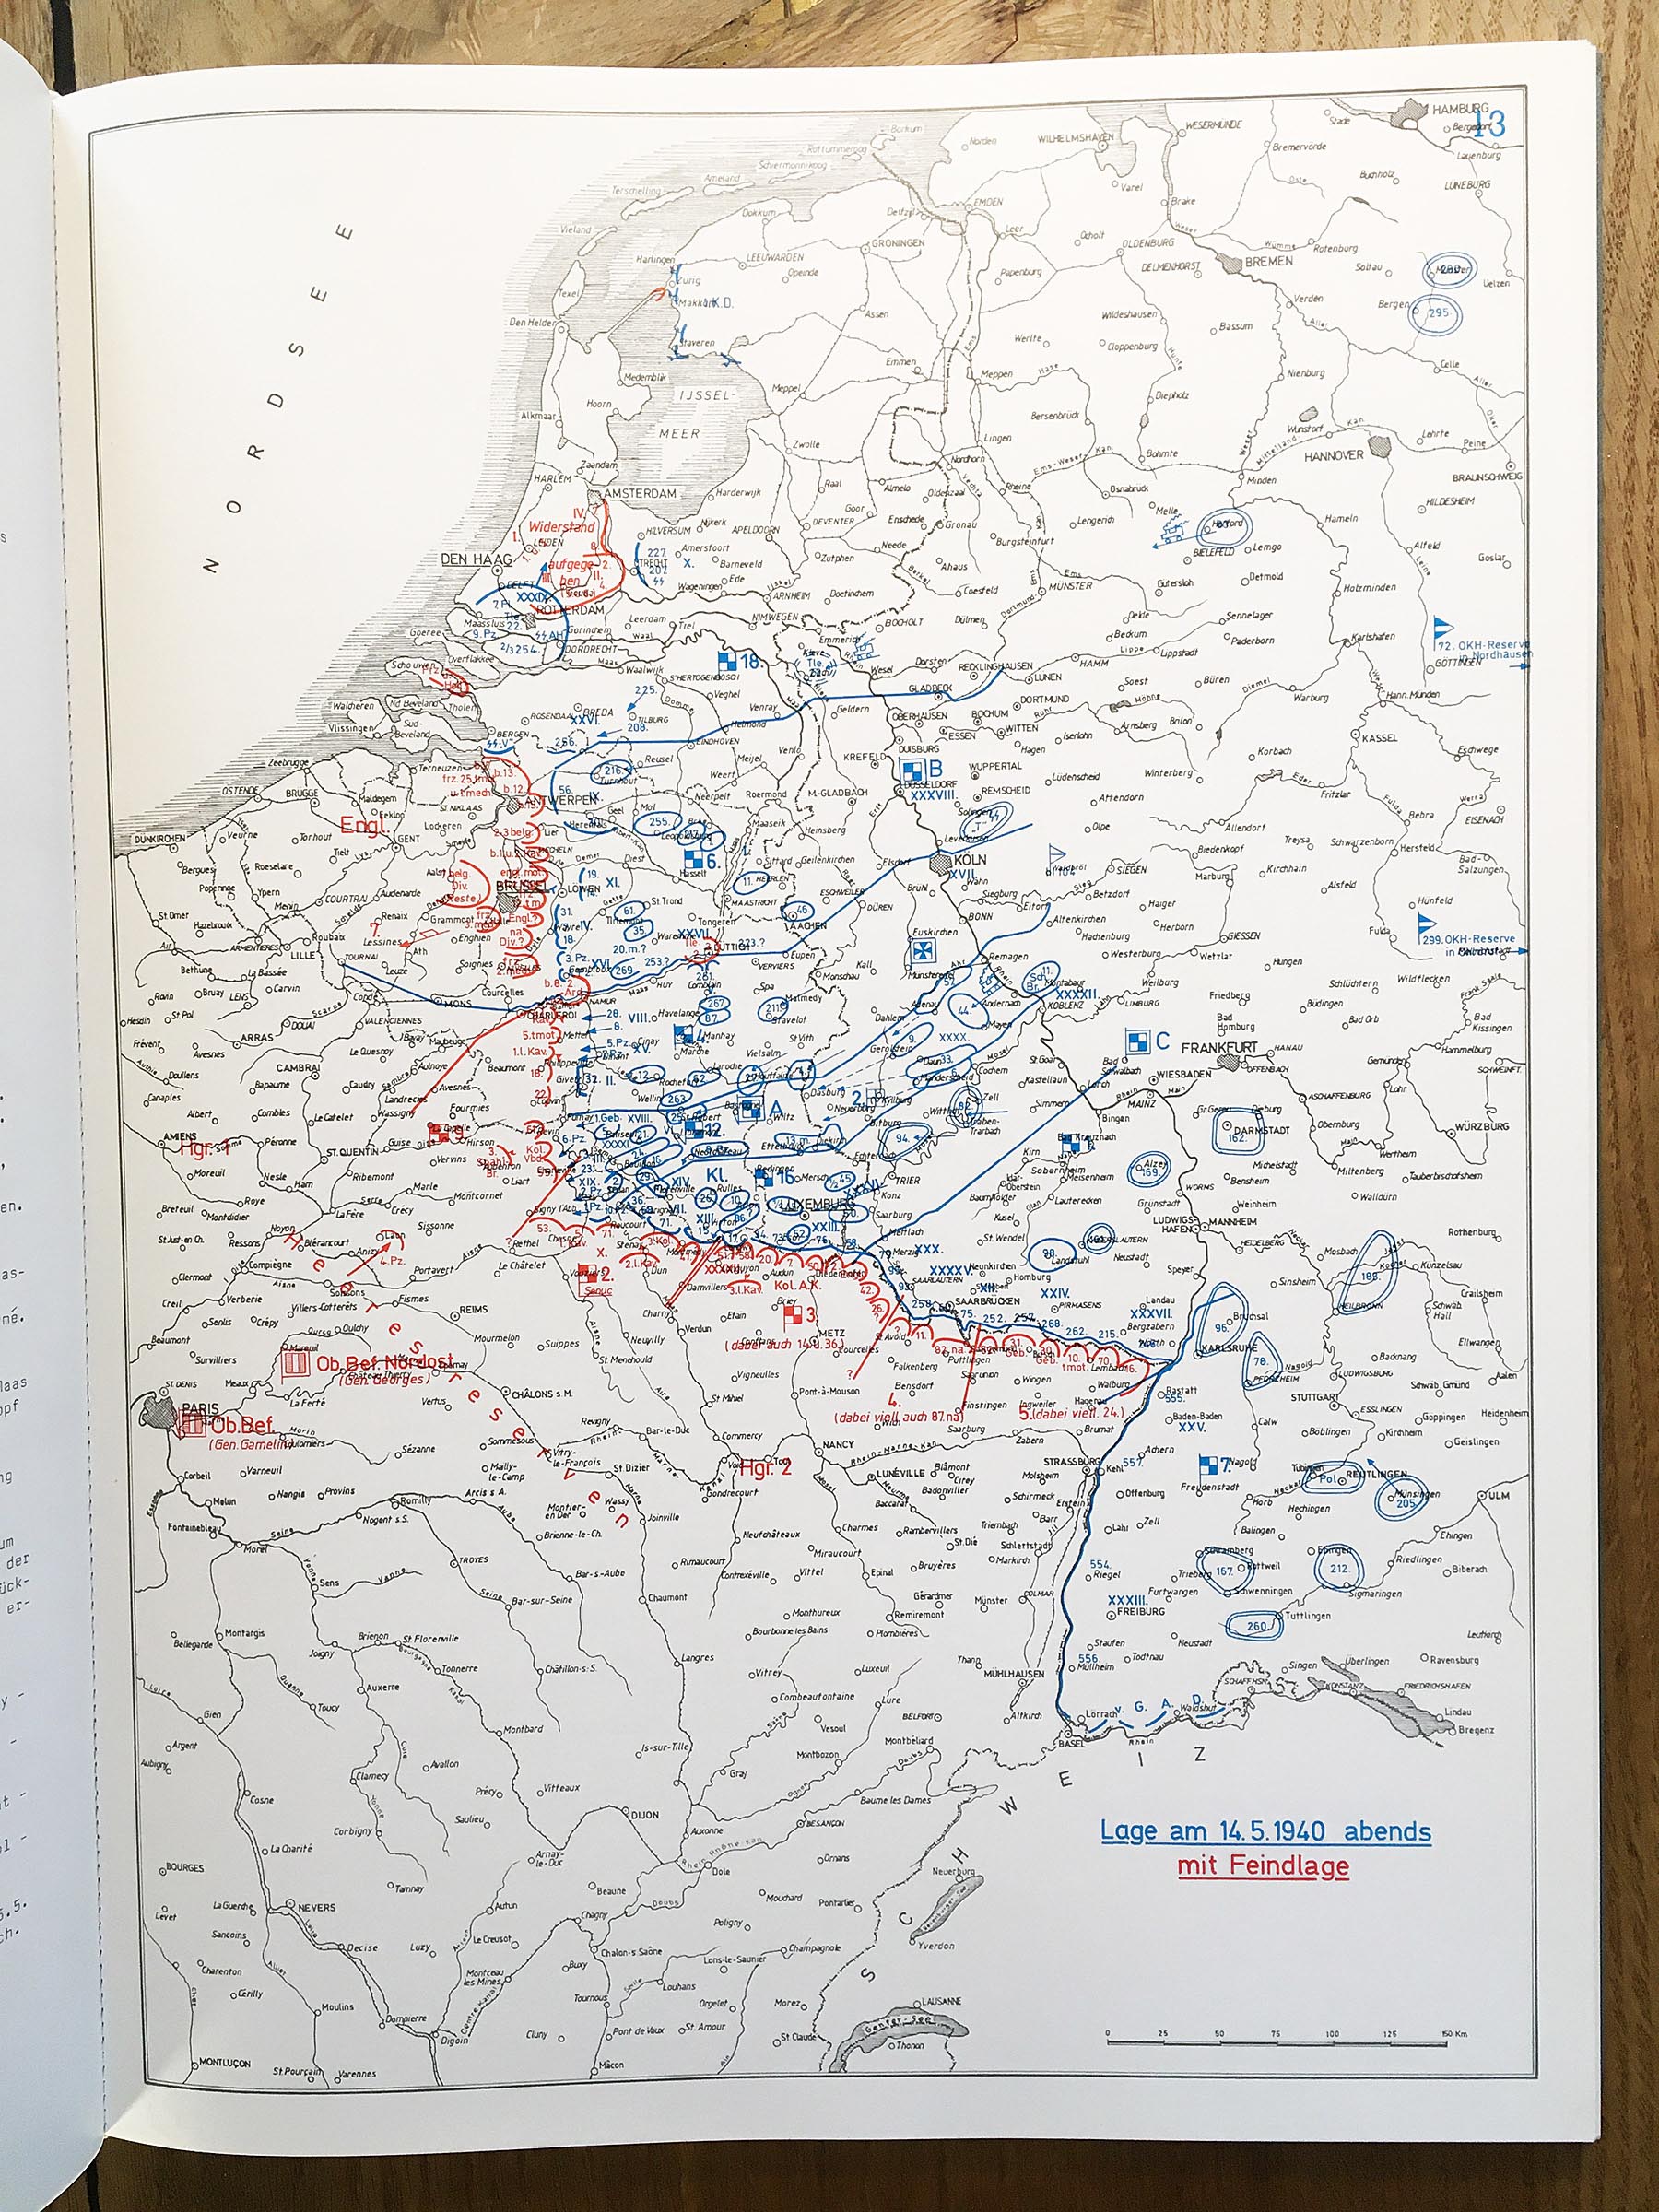 A Very Useful Resource - Big Books of Maps - Air War Publications